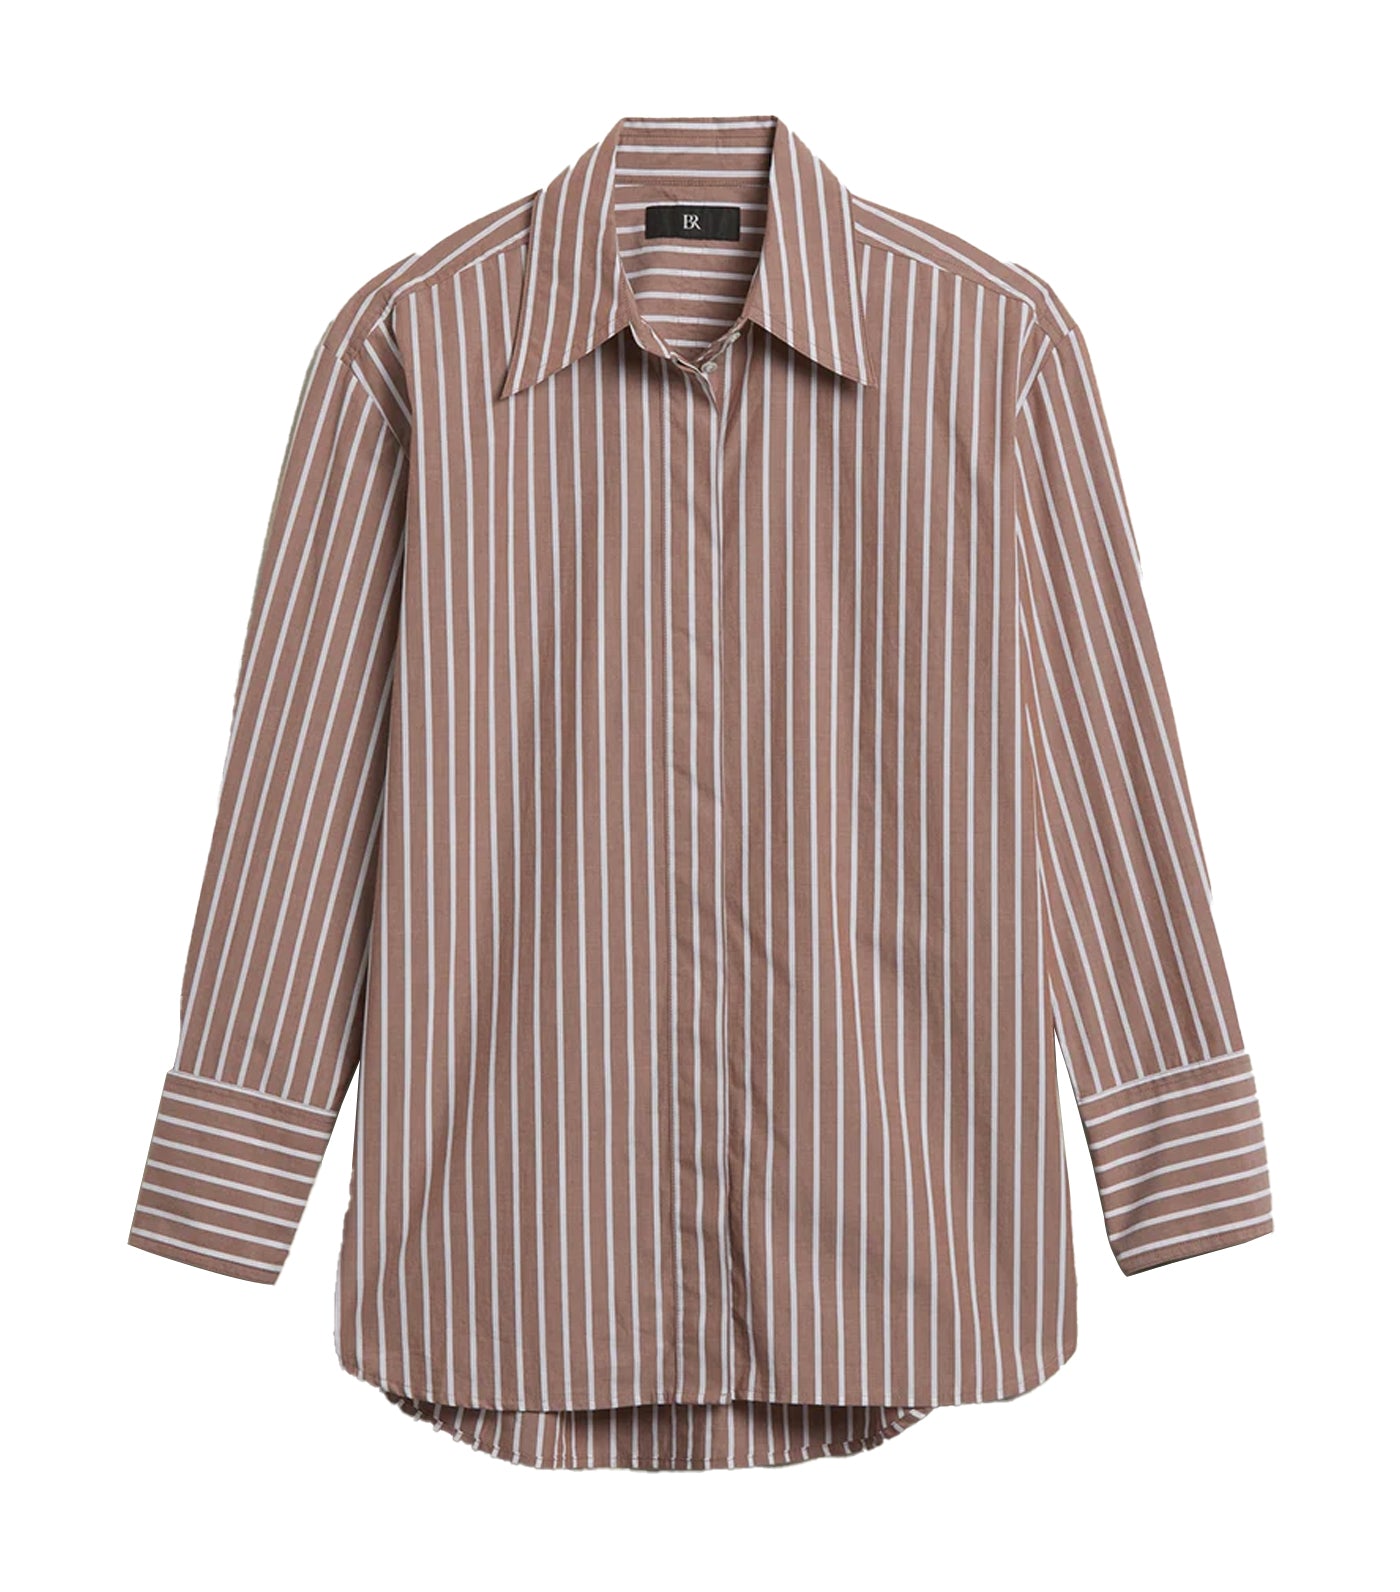 The Oversized Tunic City Stripe Brown